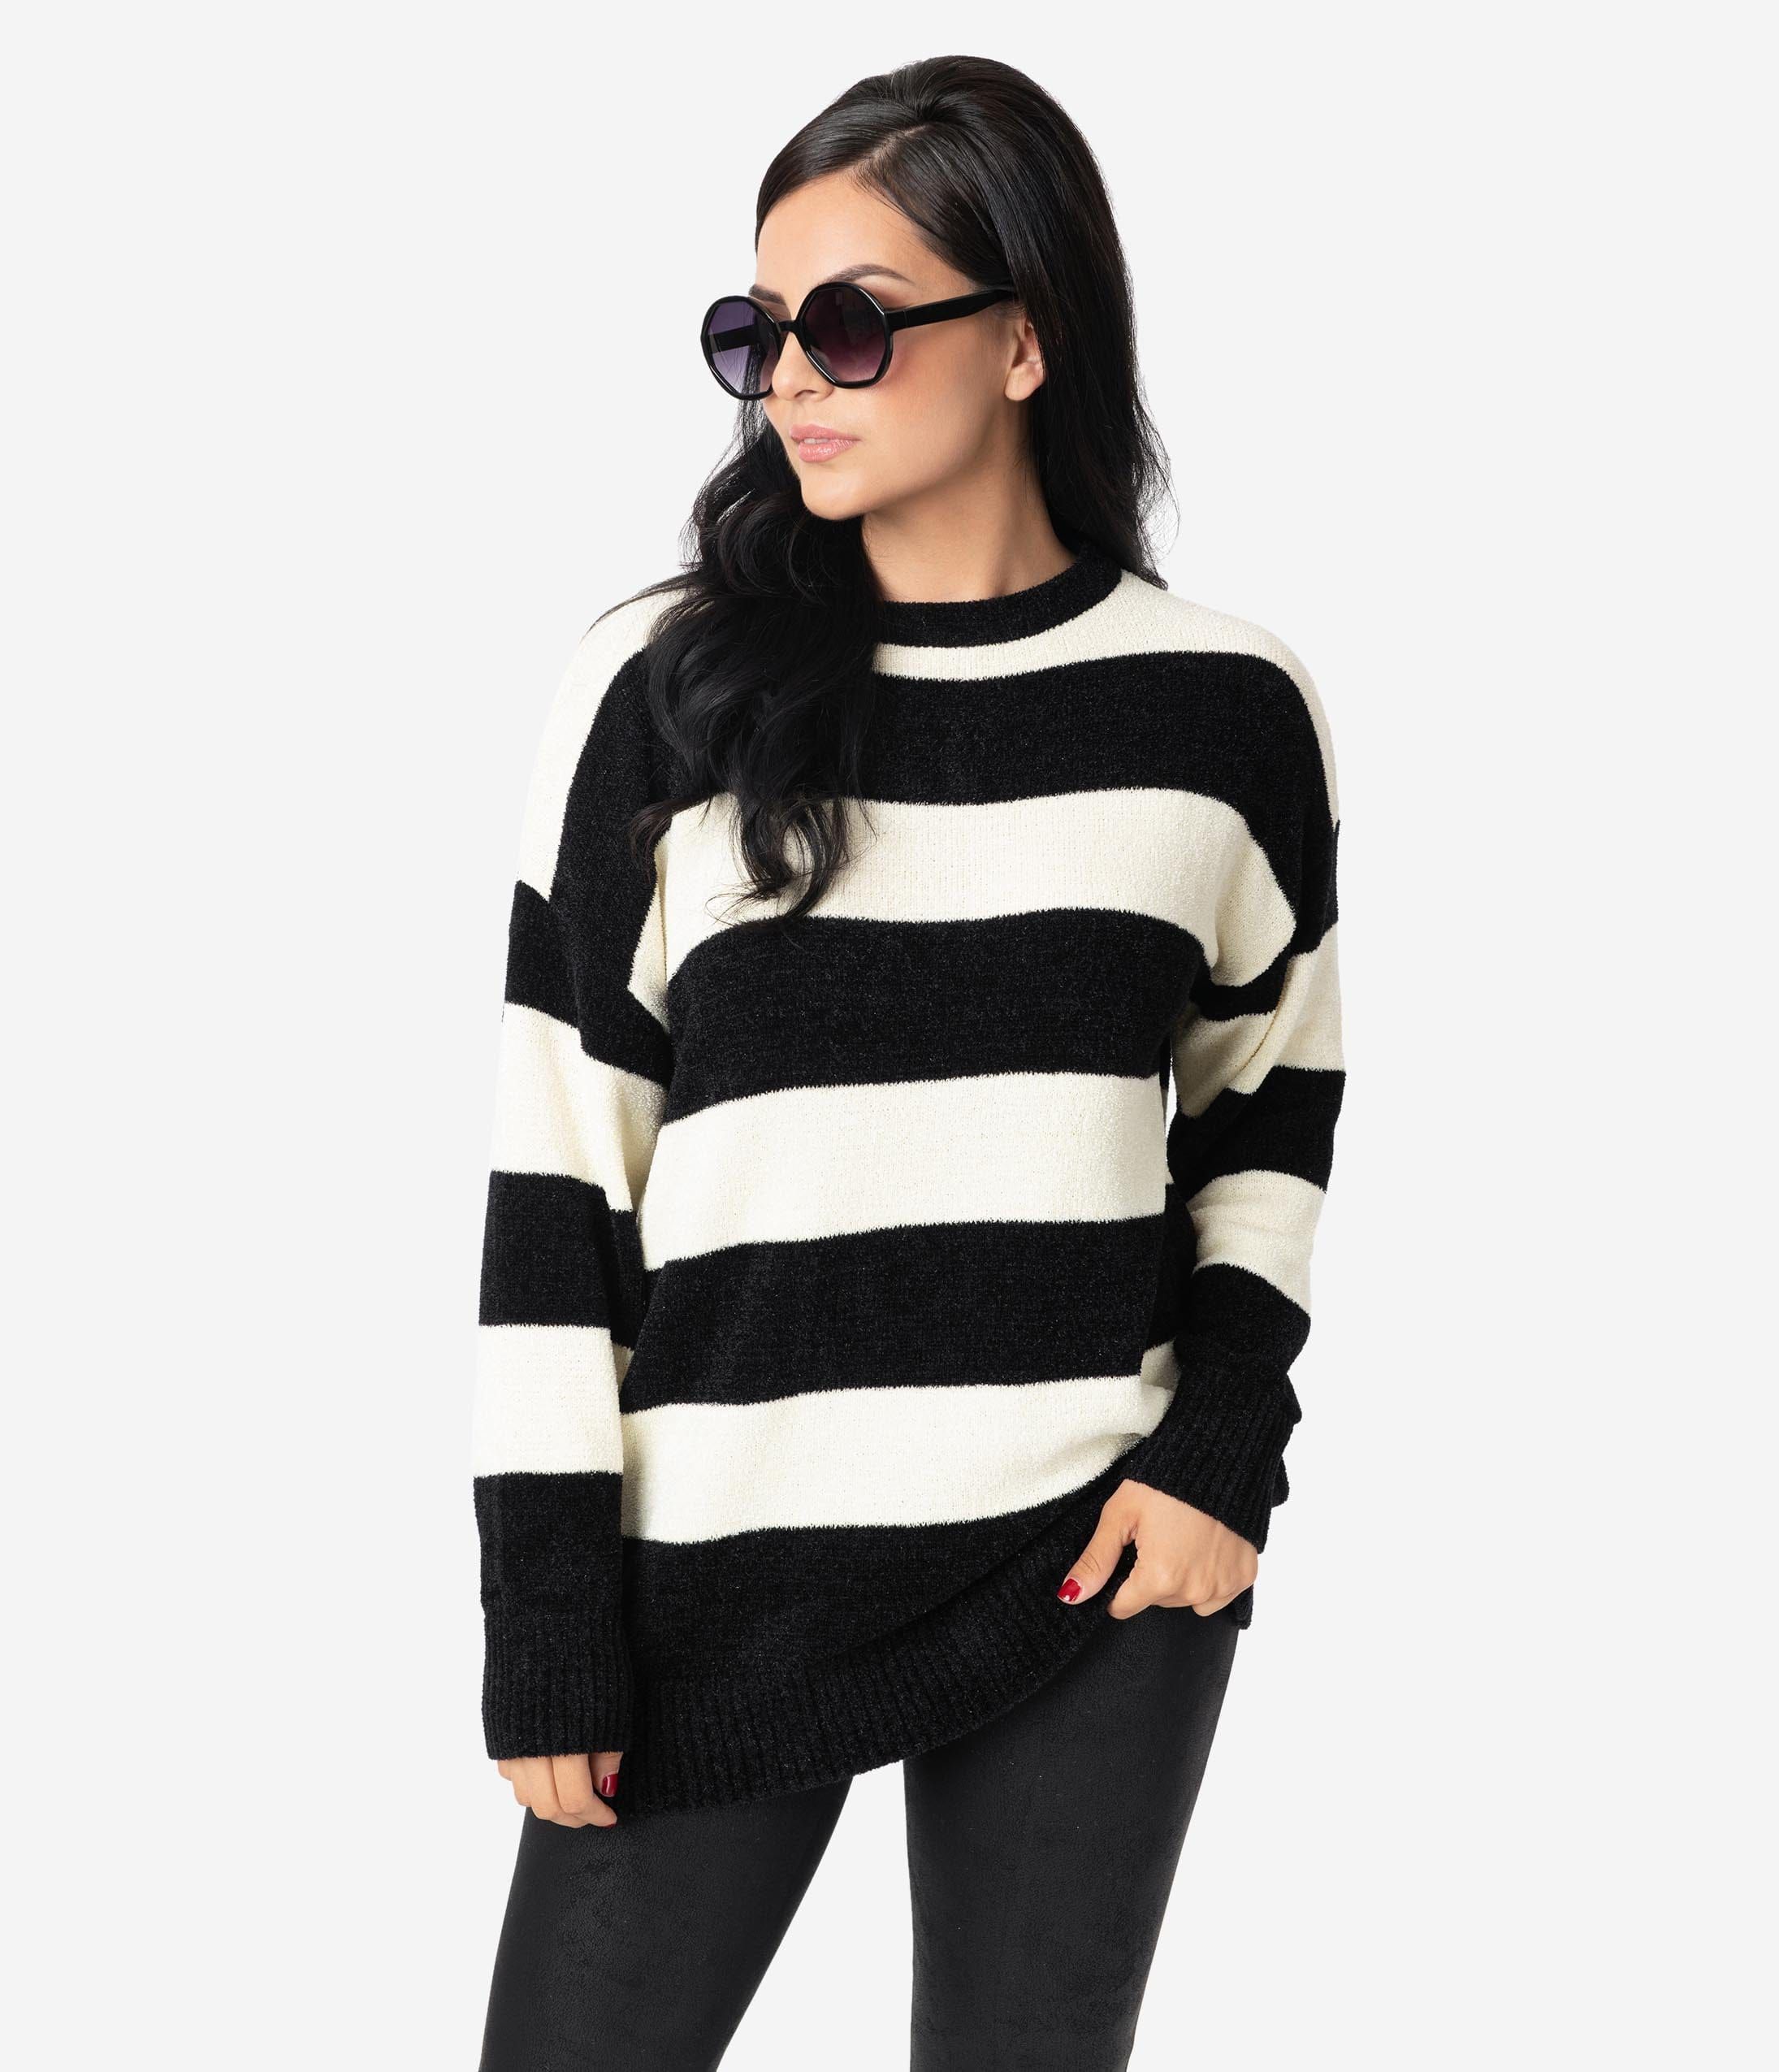 Black & Cream Stripe Fuzzy Knit Long Sleeve Sweater Top | UniqueVintage